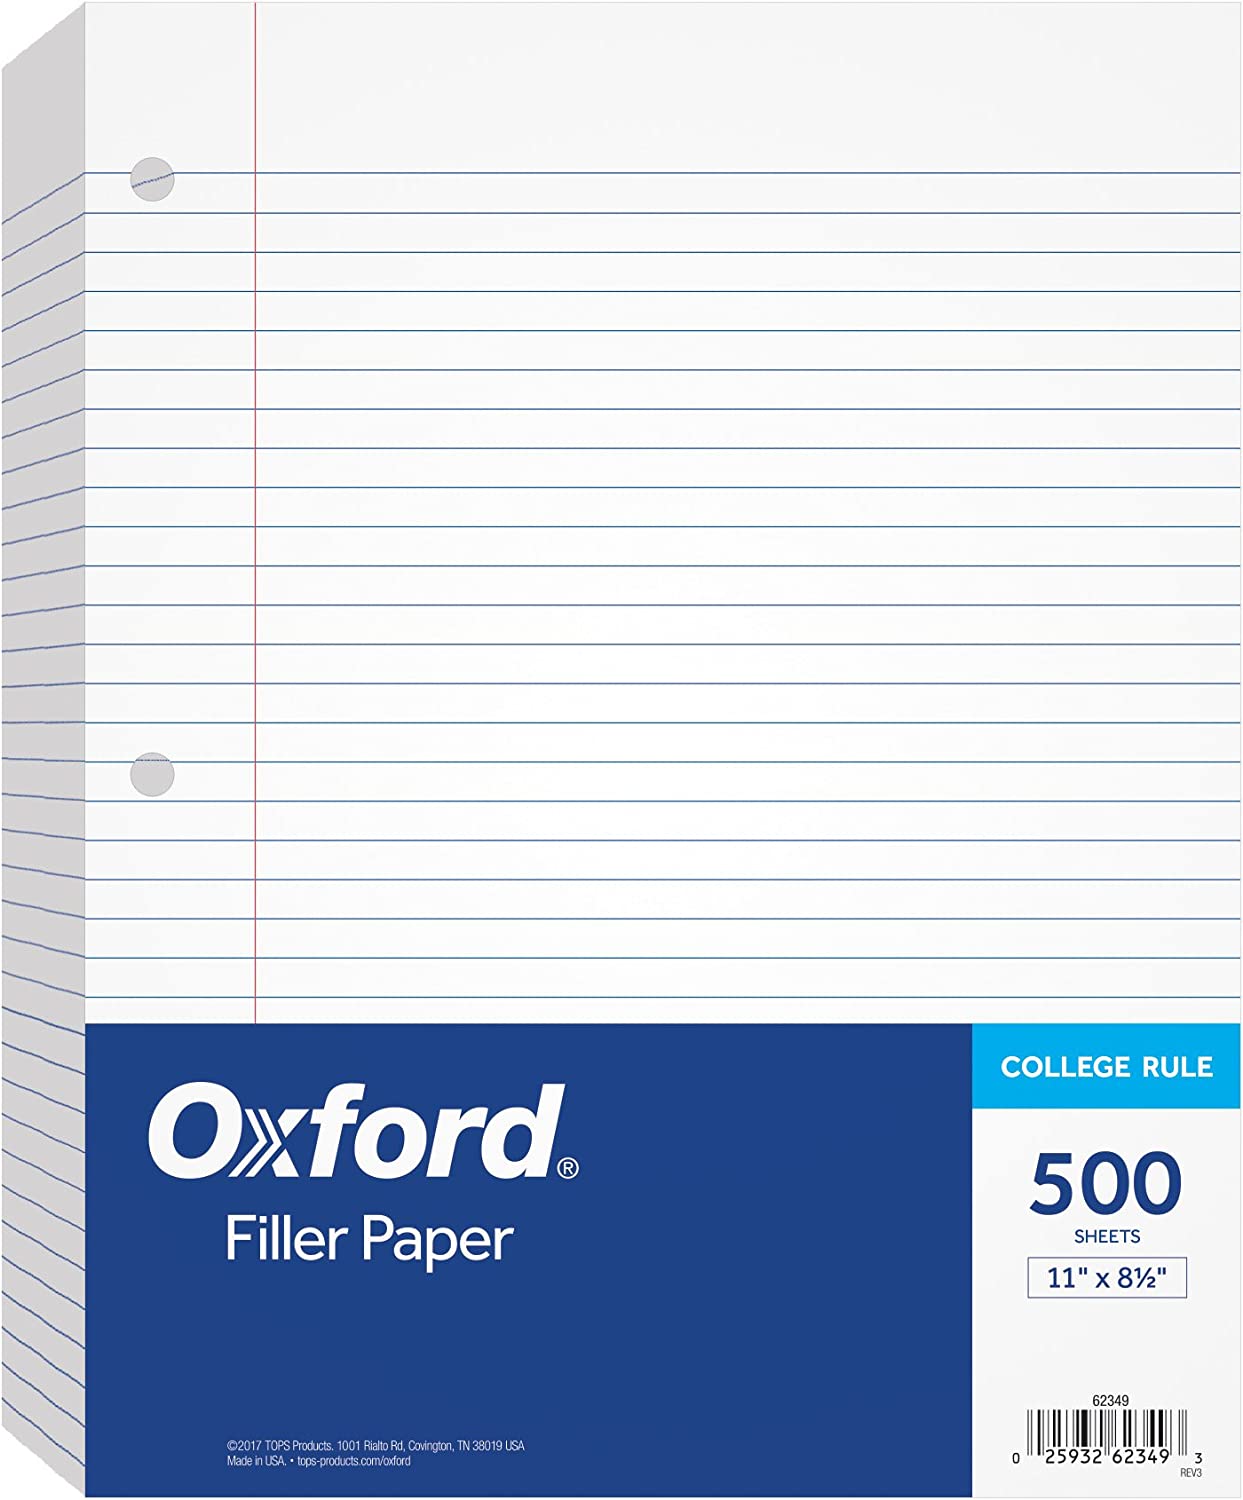 Oxford Filler Paper, 8-1/2" x 11", College Rule, 3-Hole Punched 11